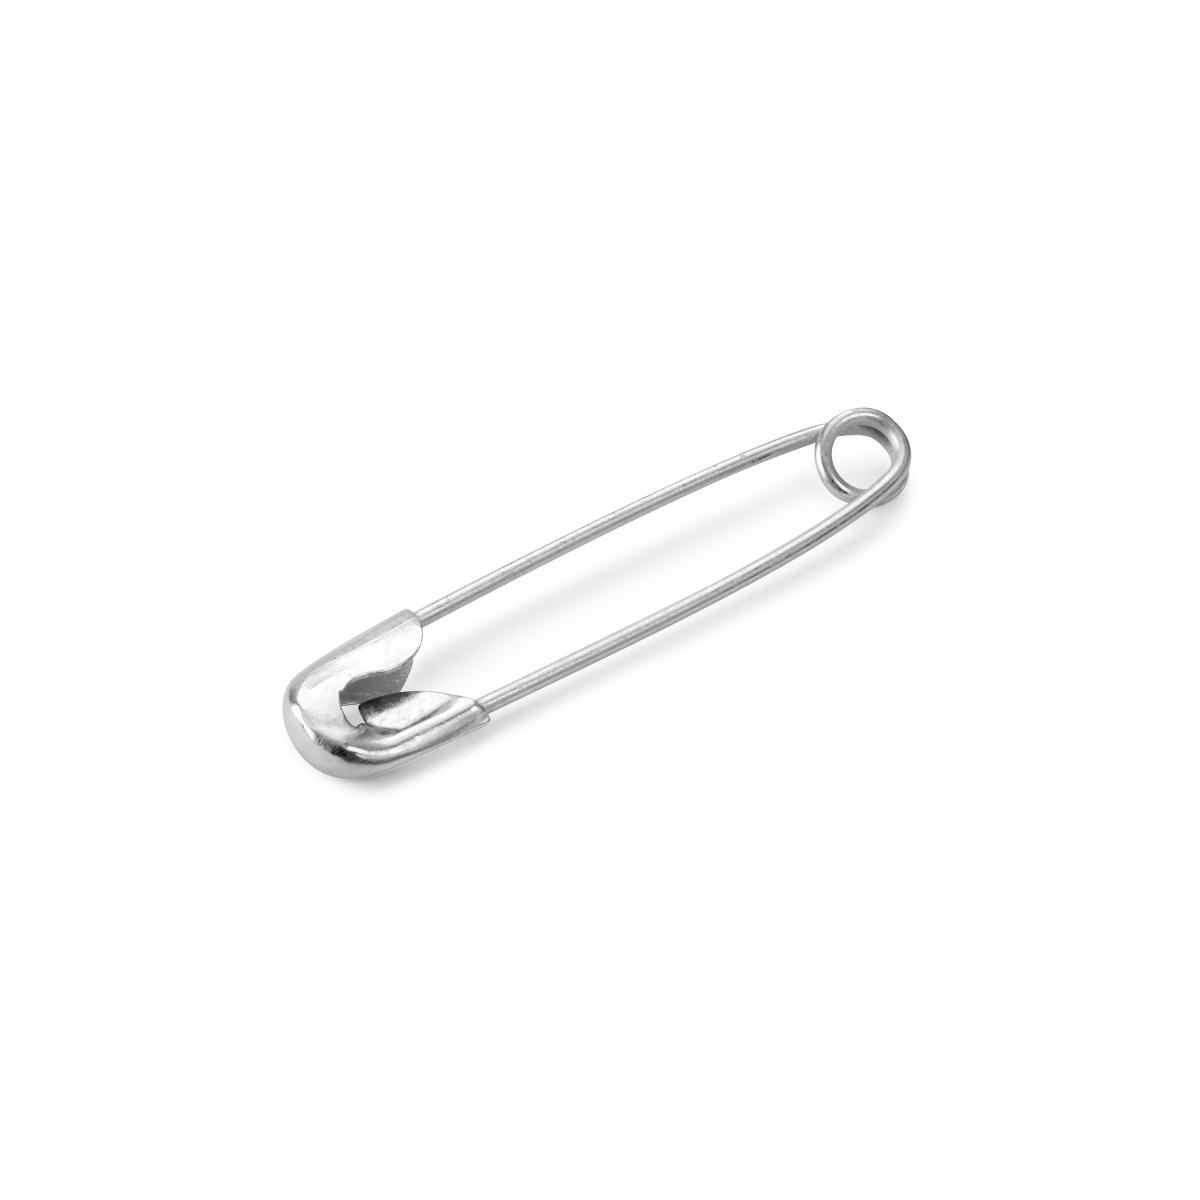  Safety Pins - Black Safety Pins Size #3 - Length 2